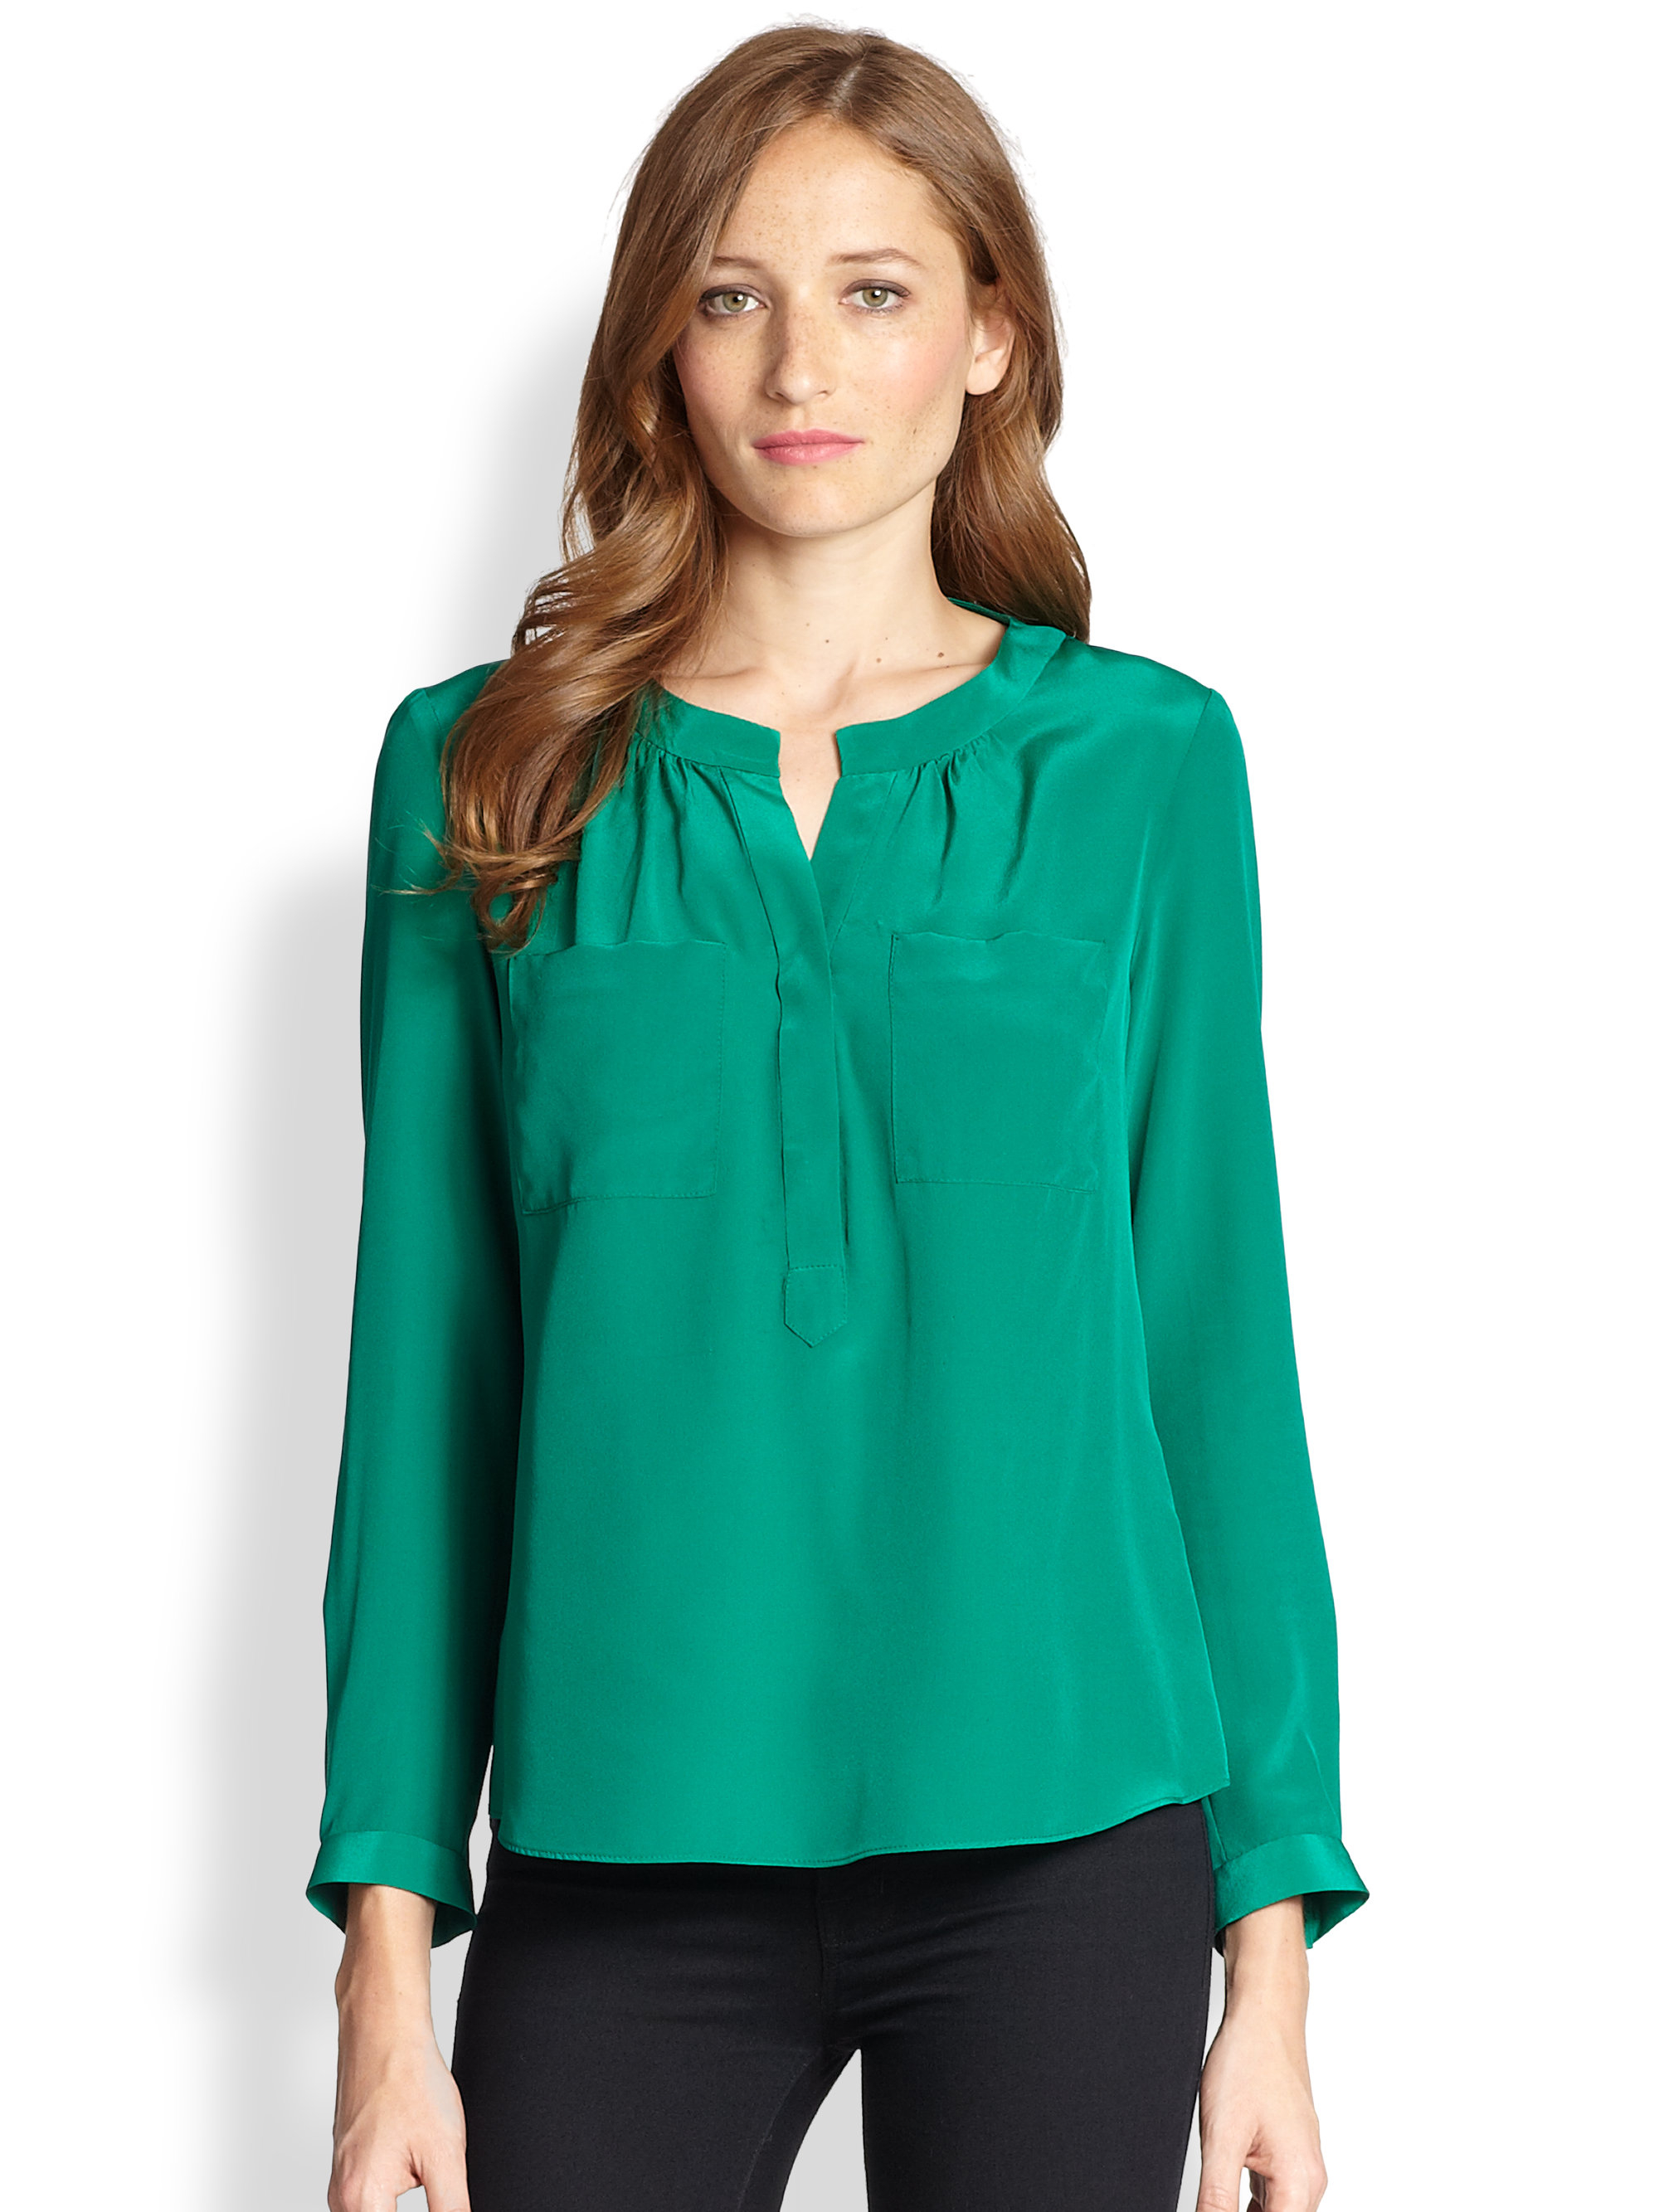 Lyst - Milly Brooke Blouse in Green